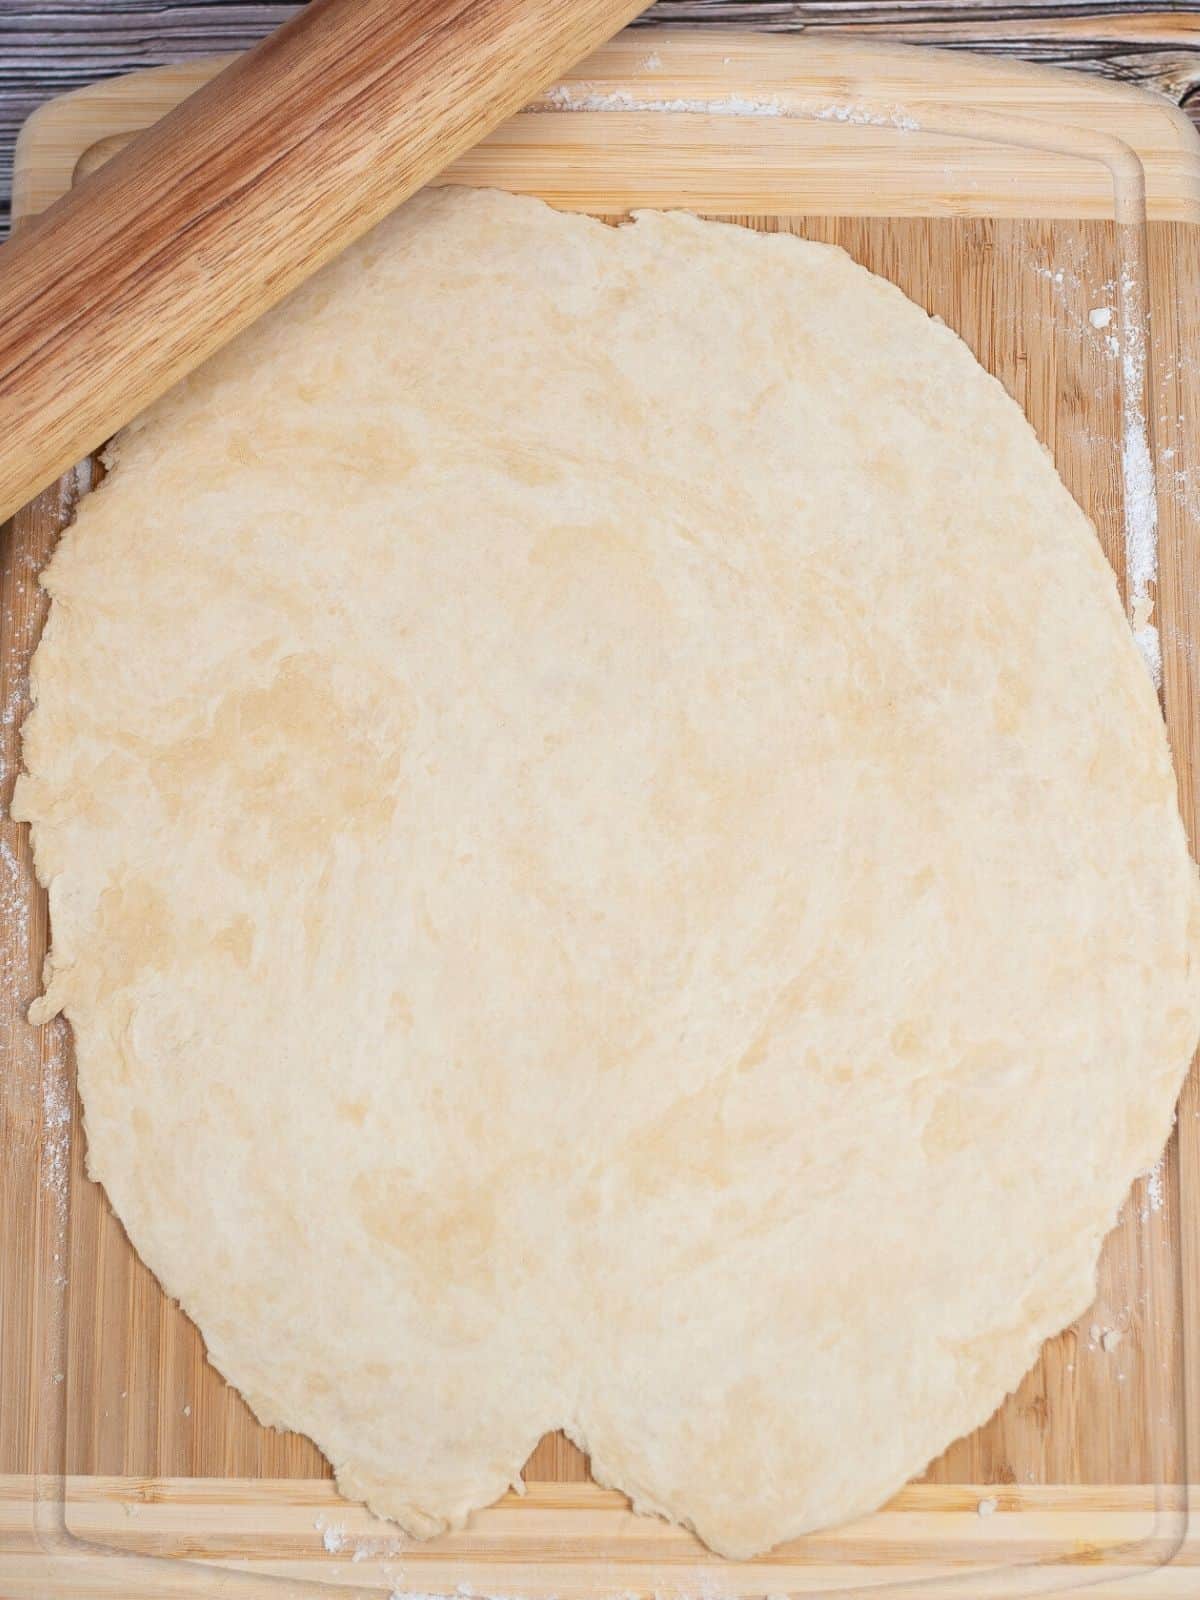 pie dough rolled out on cutting board.